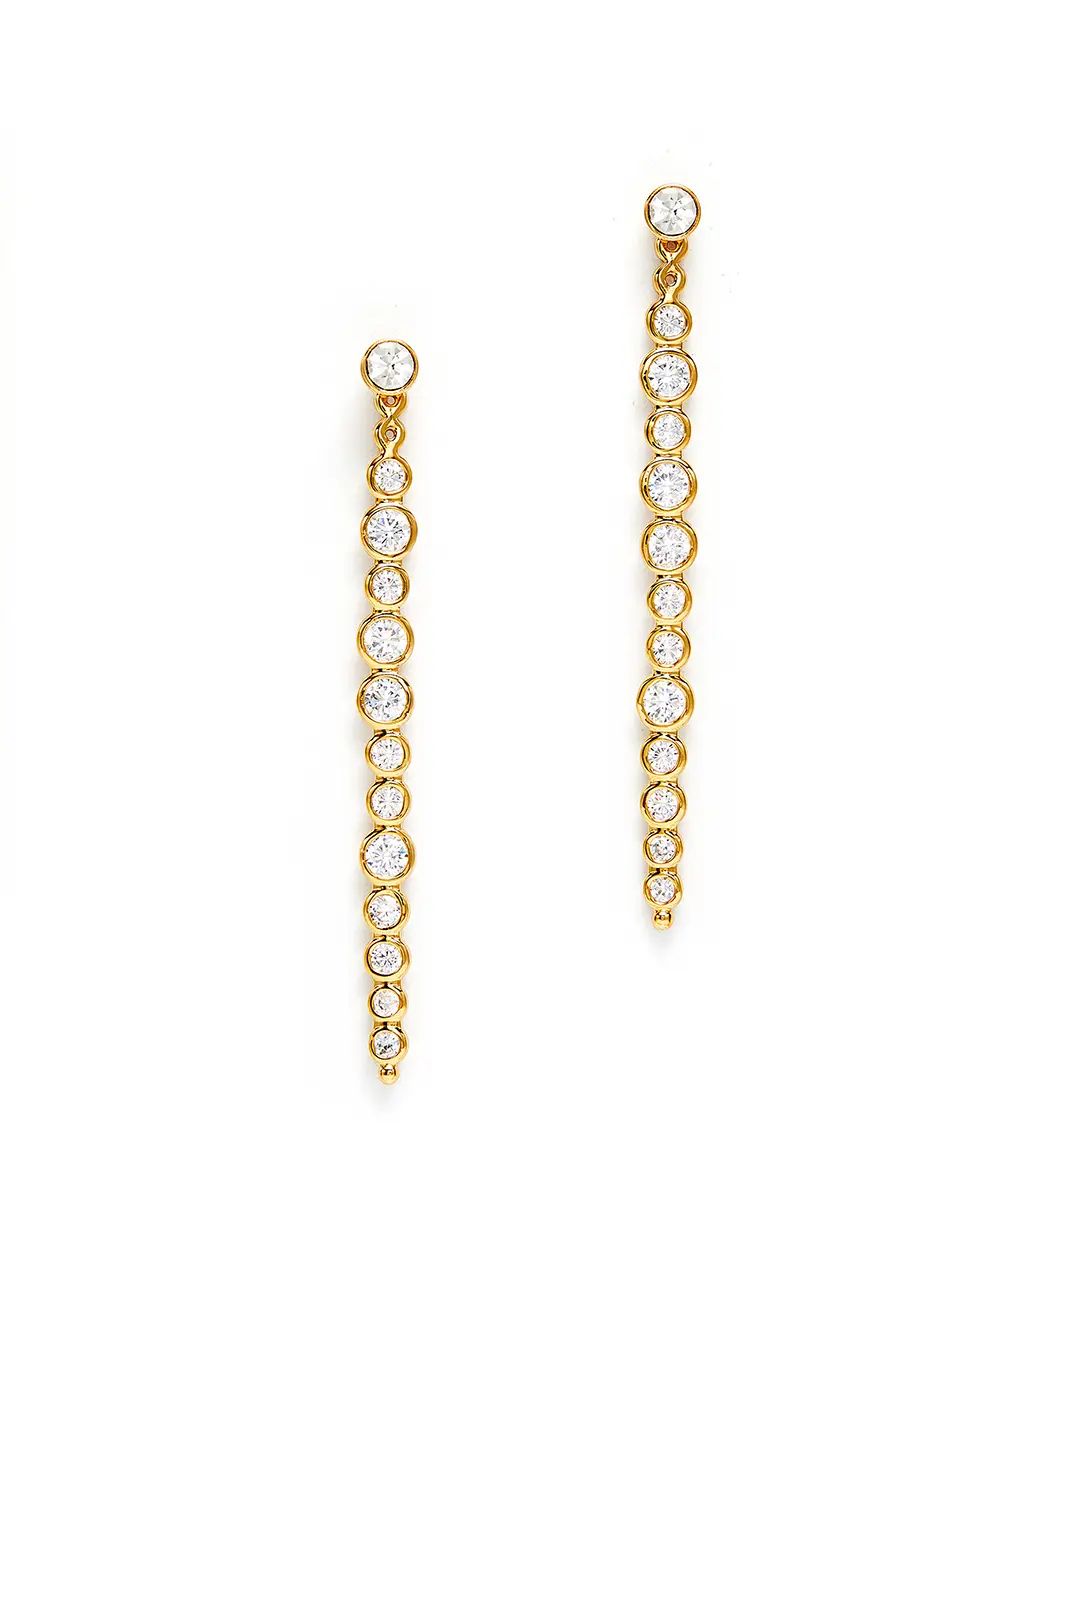 kate spade new york accessories Clear as Crystal Linear Ear Jacket | Rent The Runway